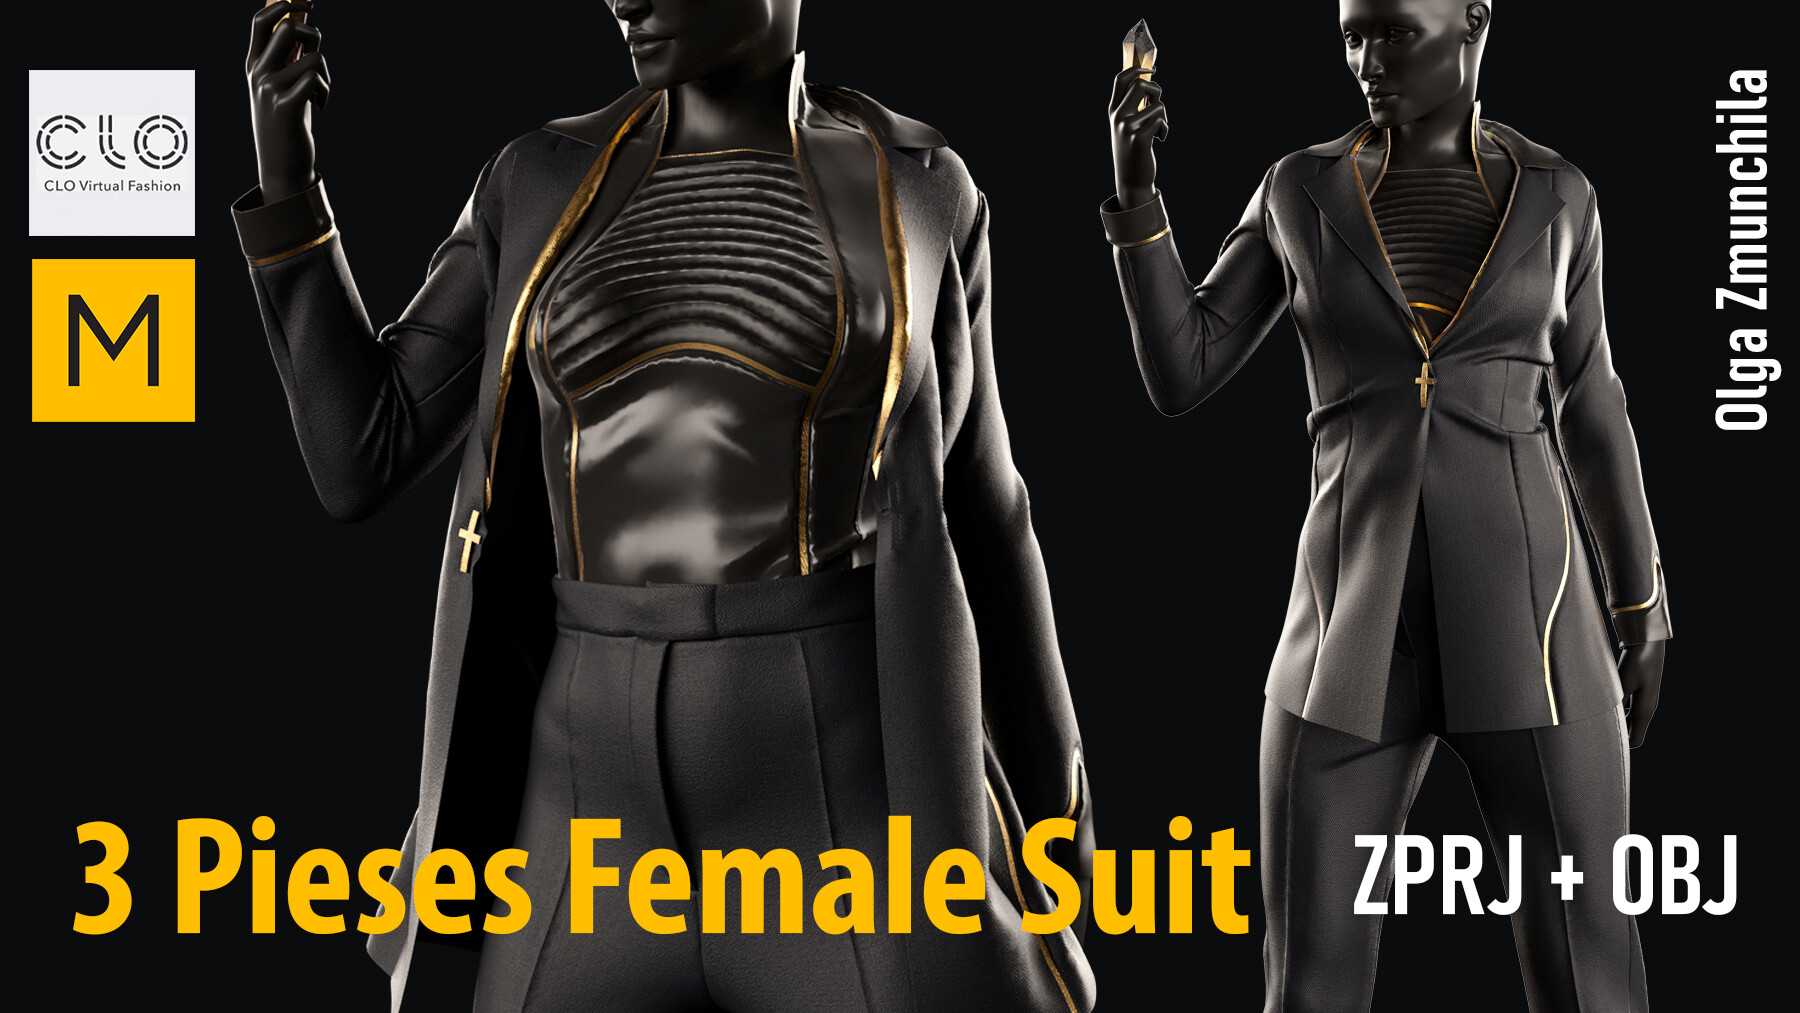 ArtStation - Three pieses female suit / jacket with shoulder pads